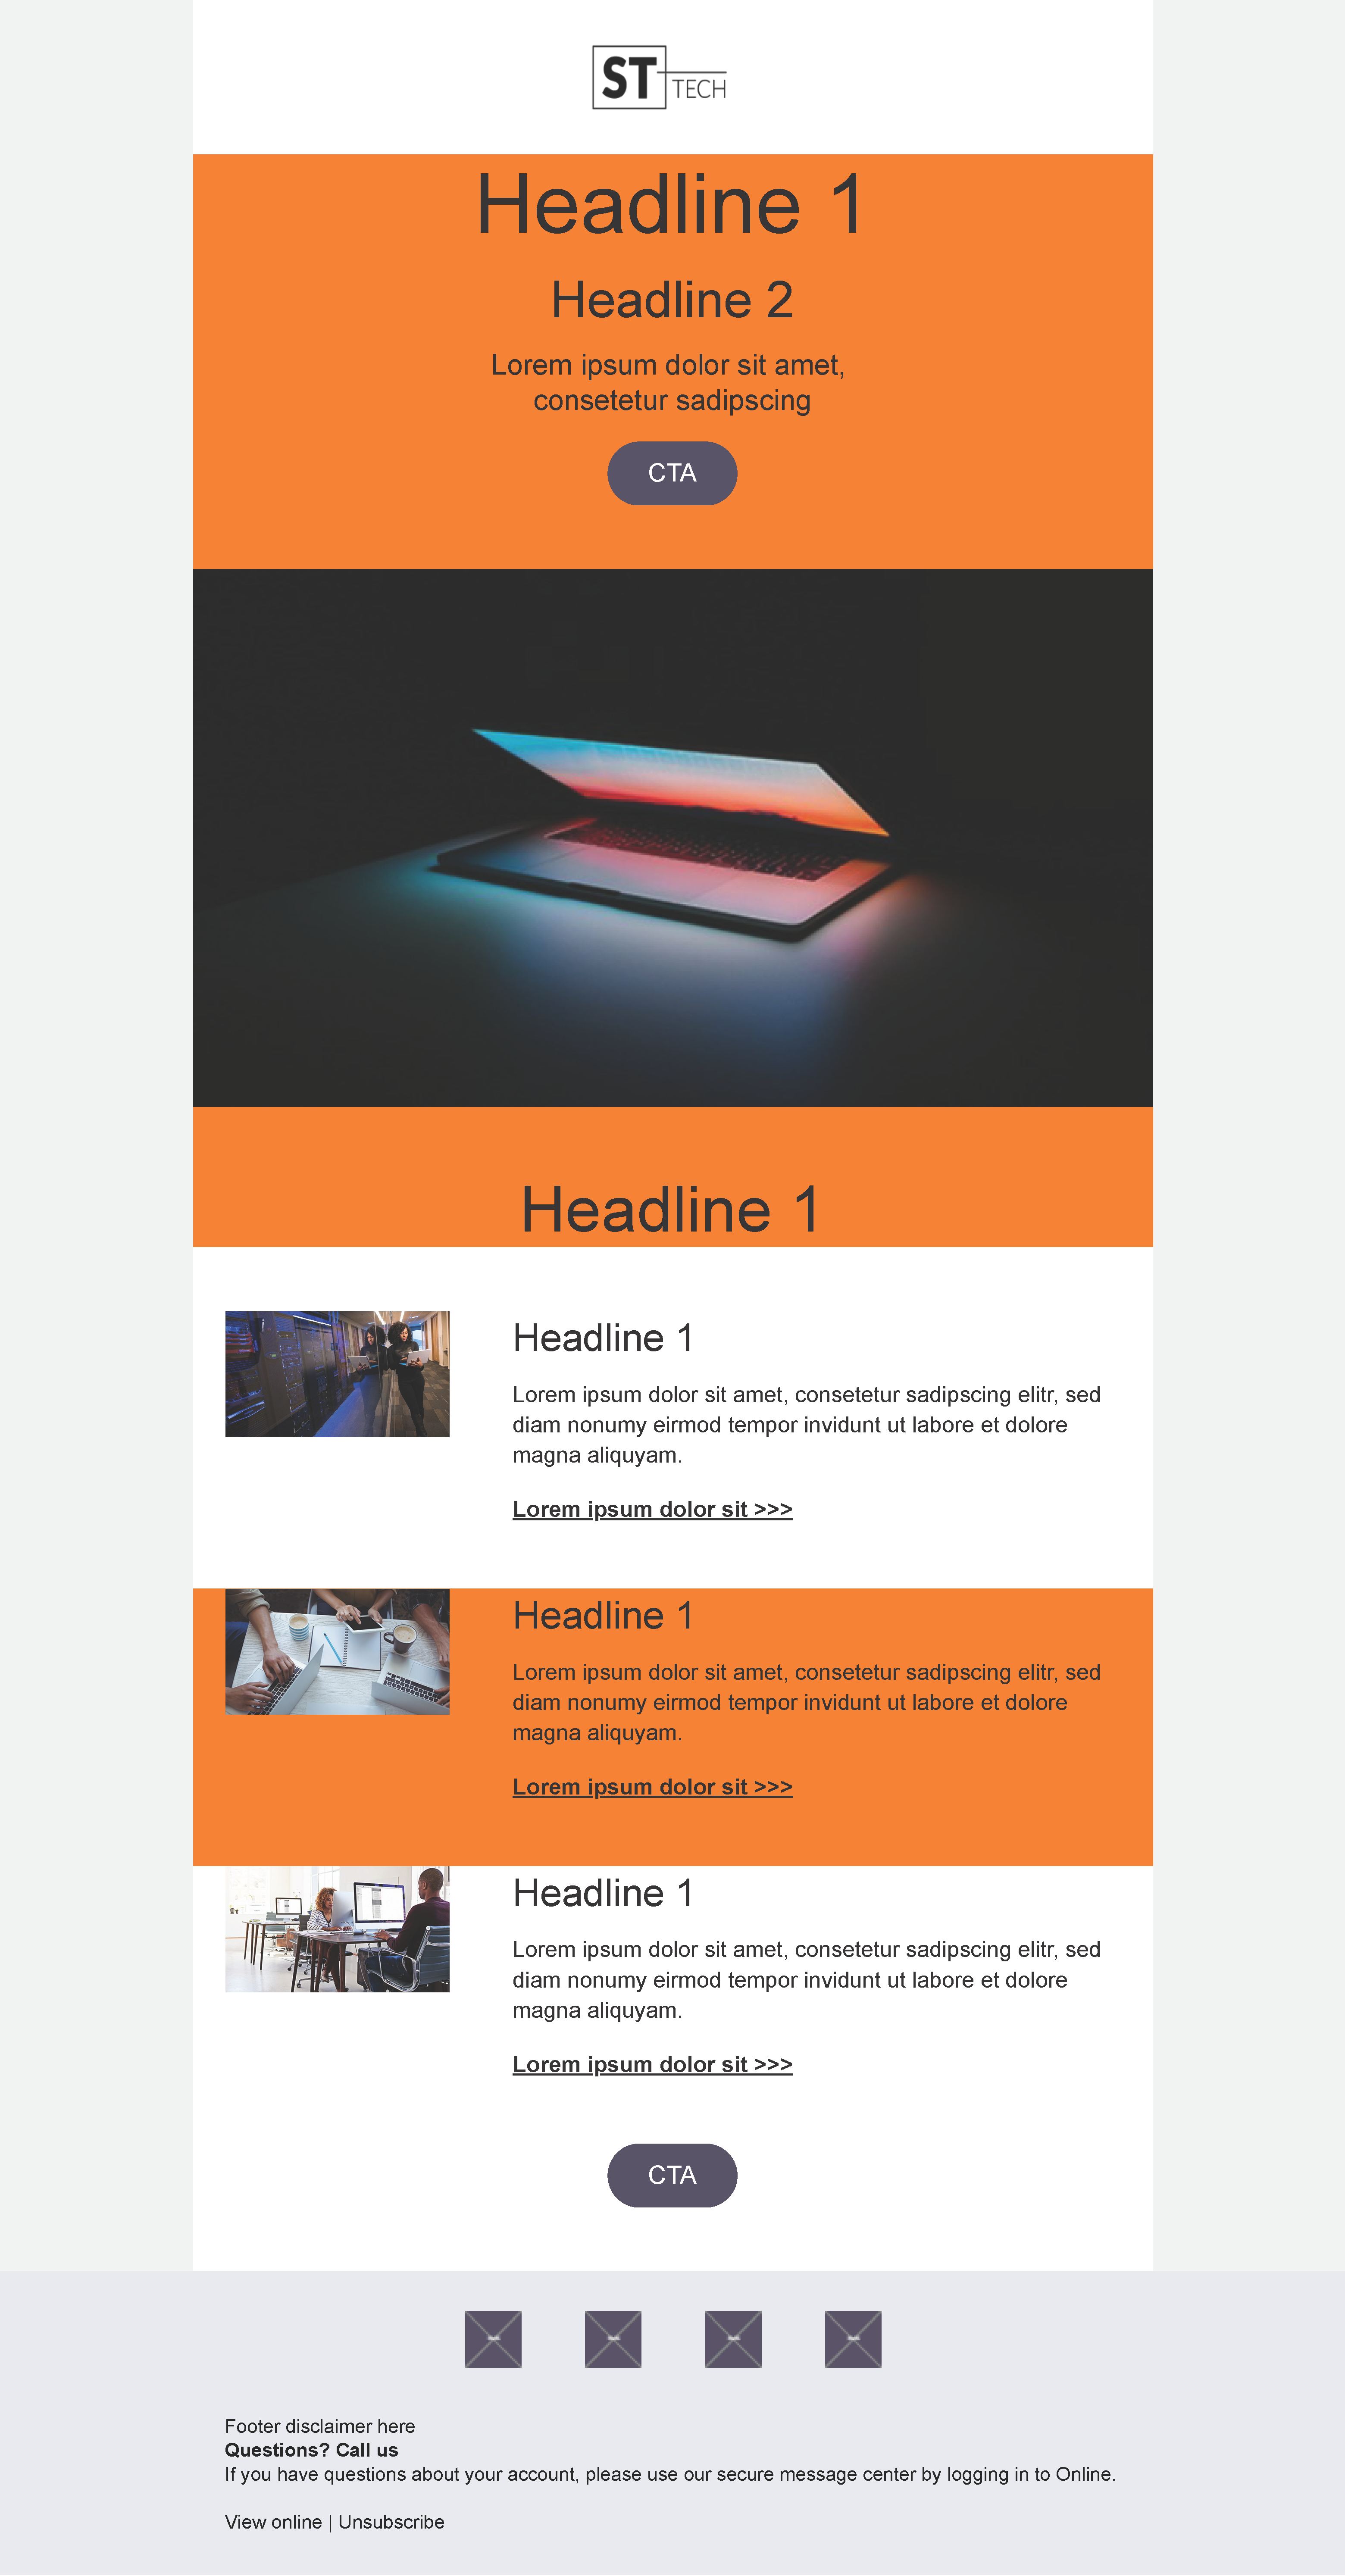 Product Update Email Template 2 for Technology Companie